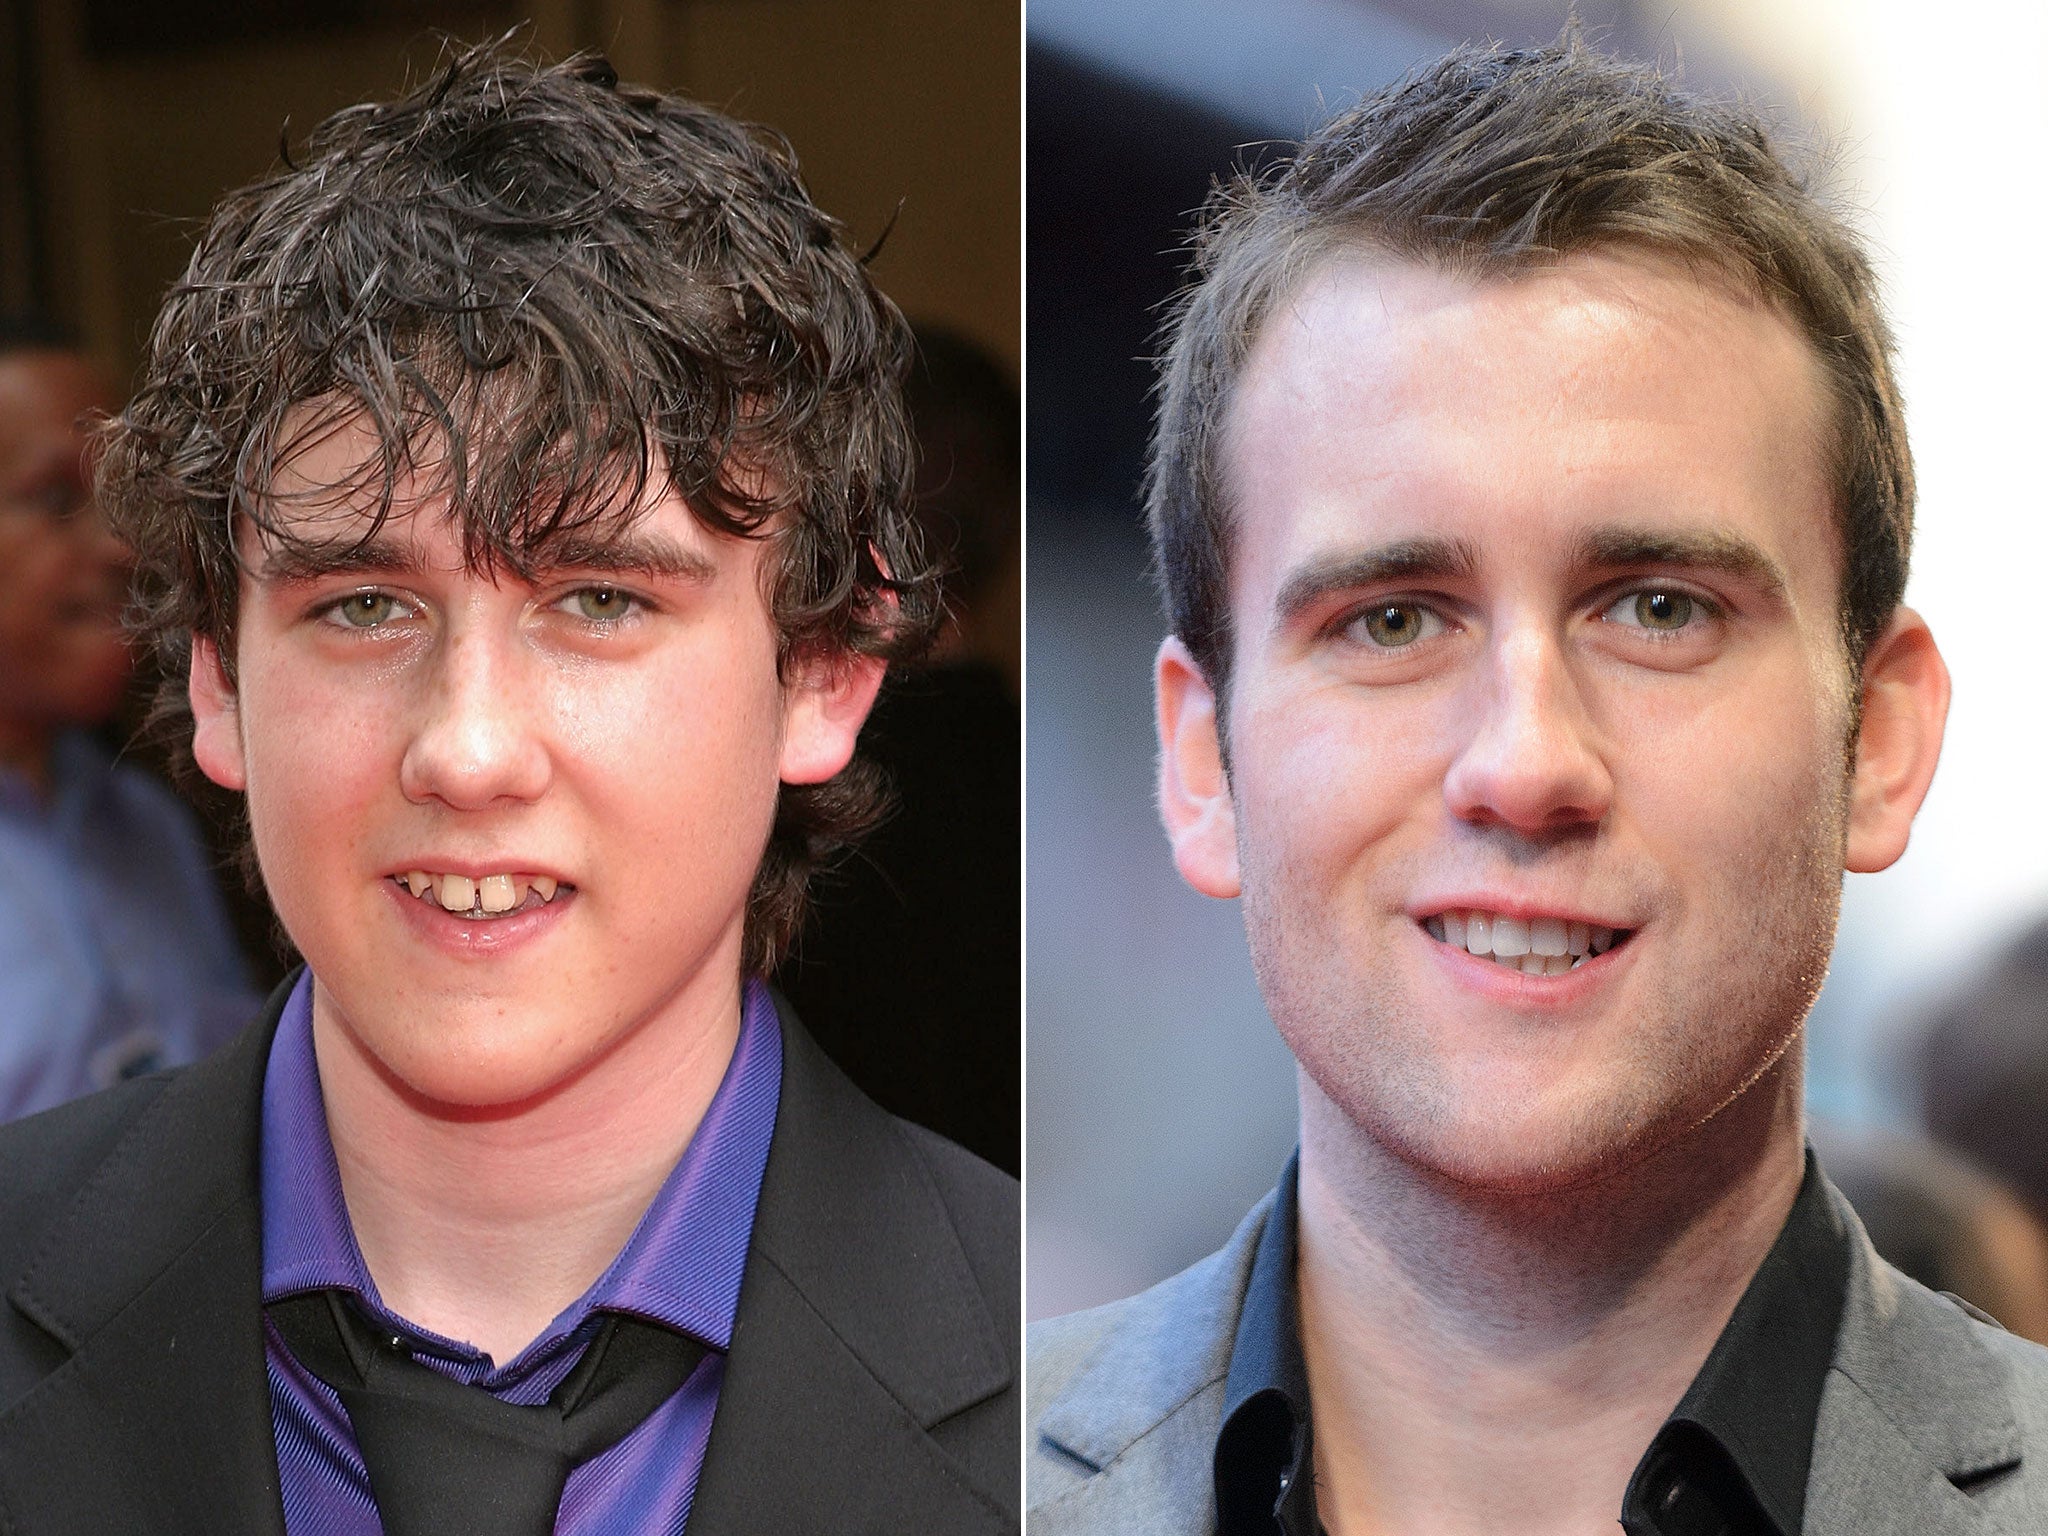 Matthew Lewis as a teenager in the Harry Potter movies and now, aged 25